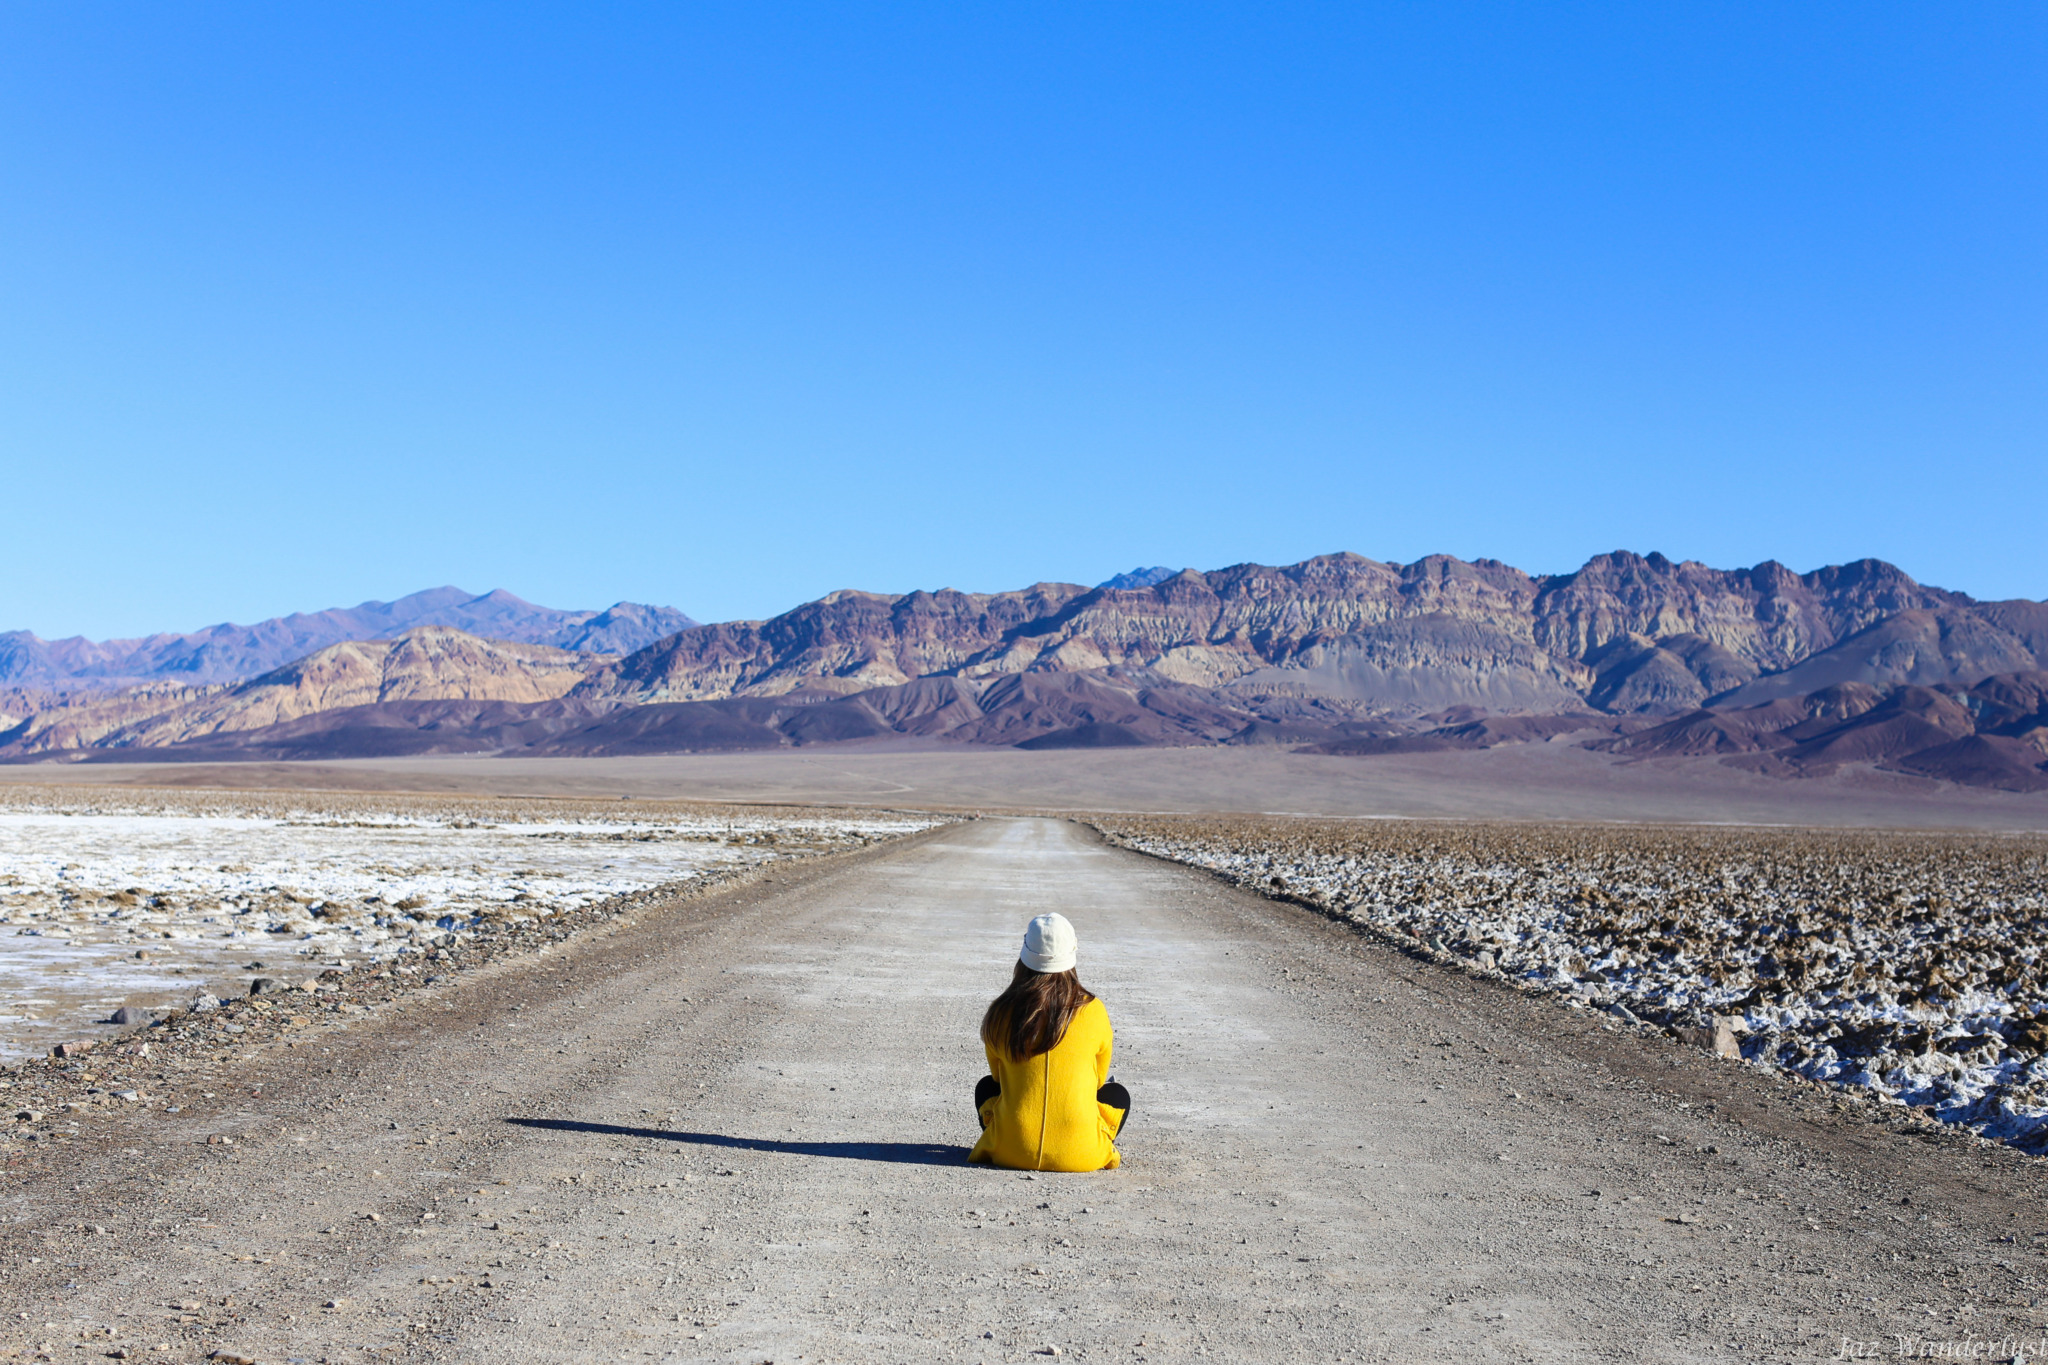 Woman on path looking at Death Valley landscape. Photography by Jaz Wanderlust.